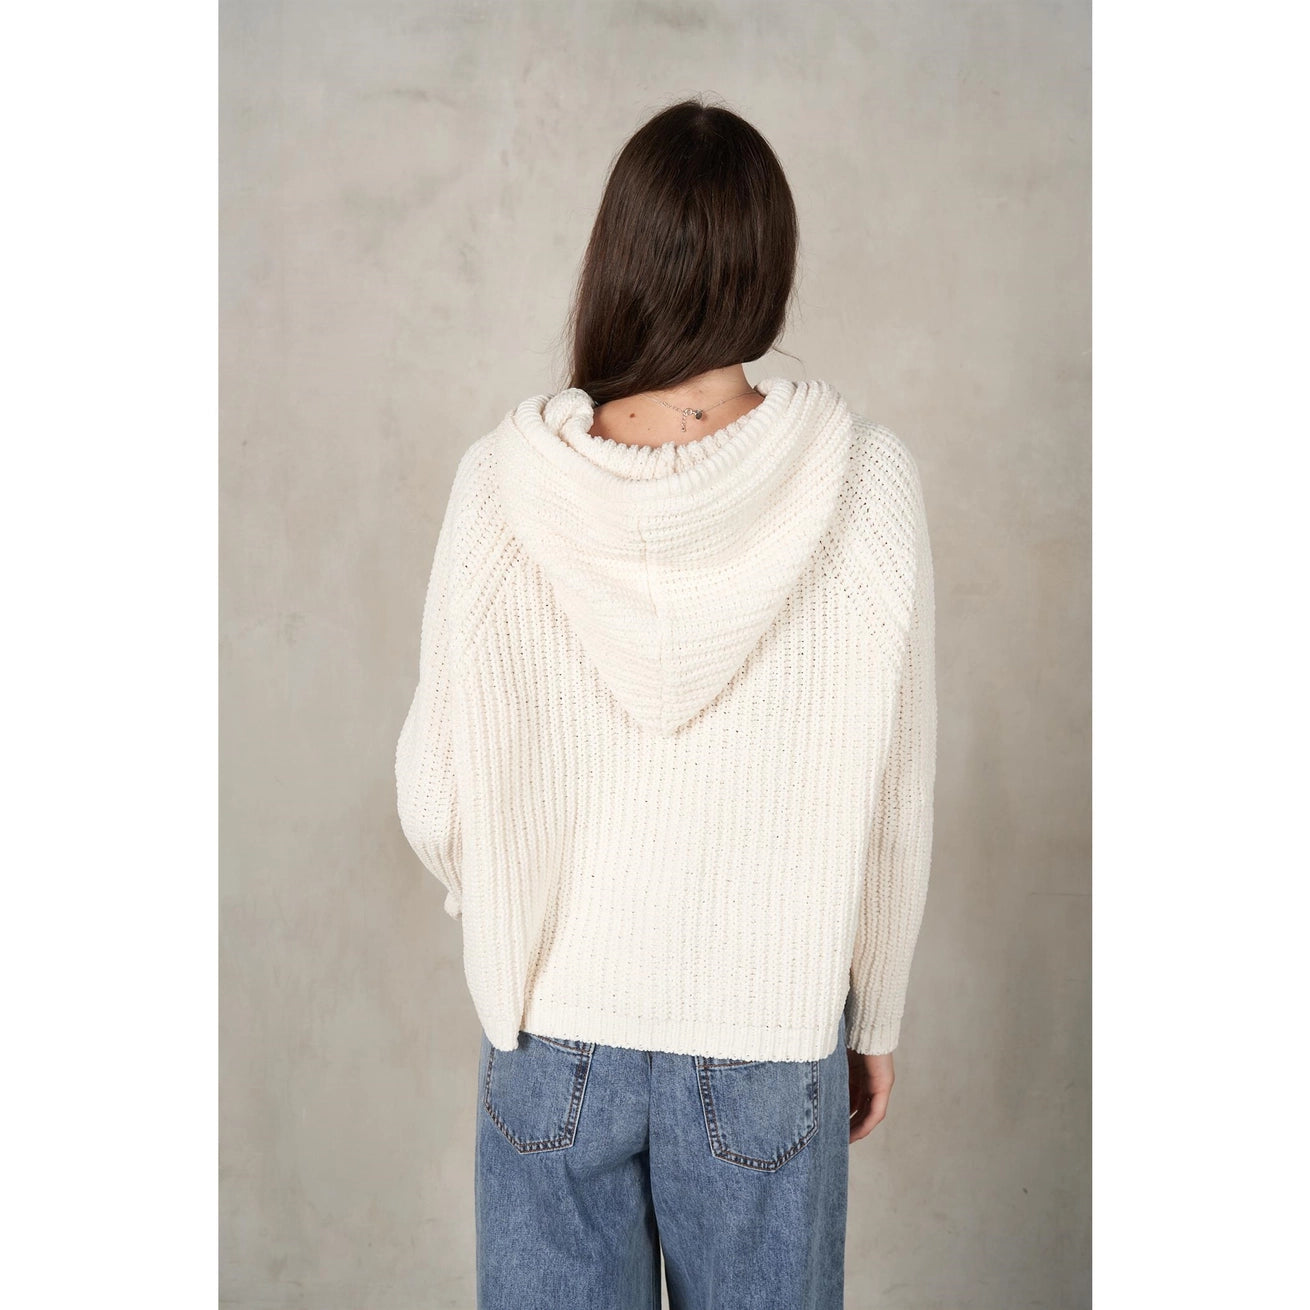 LALAMIA Hoodie Knit Sweater